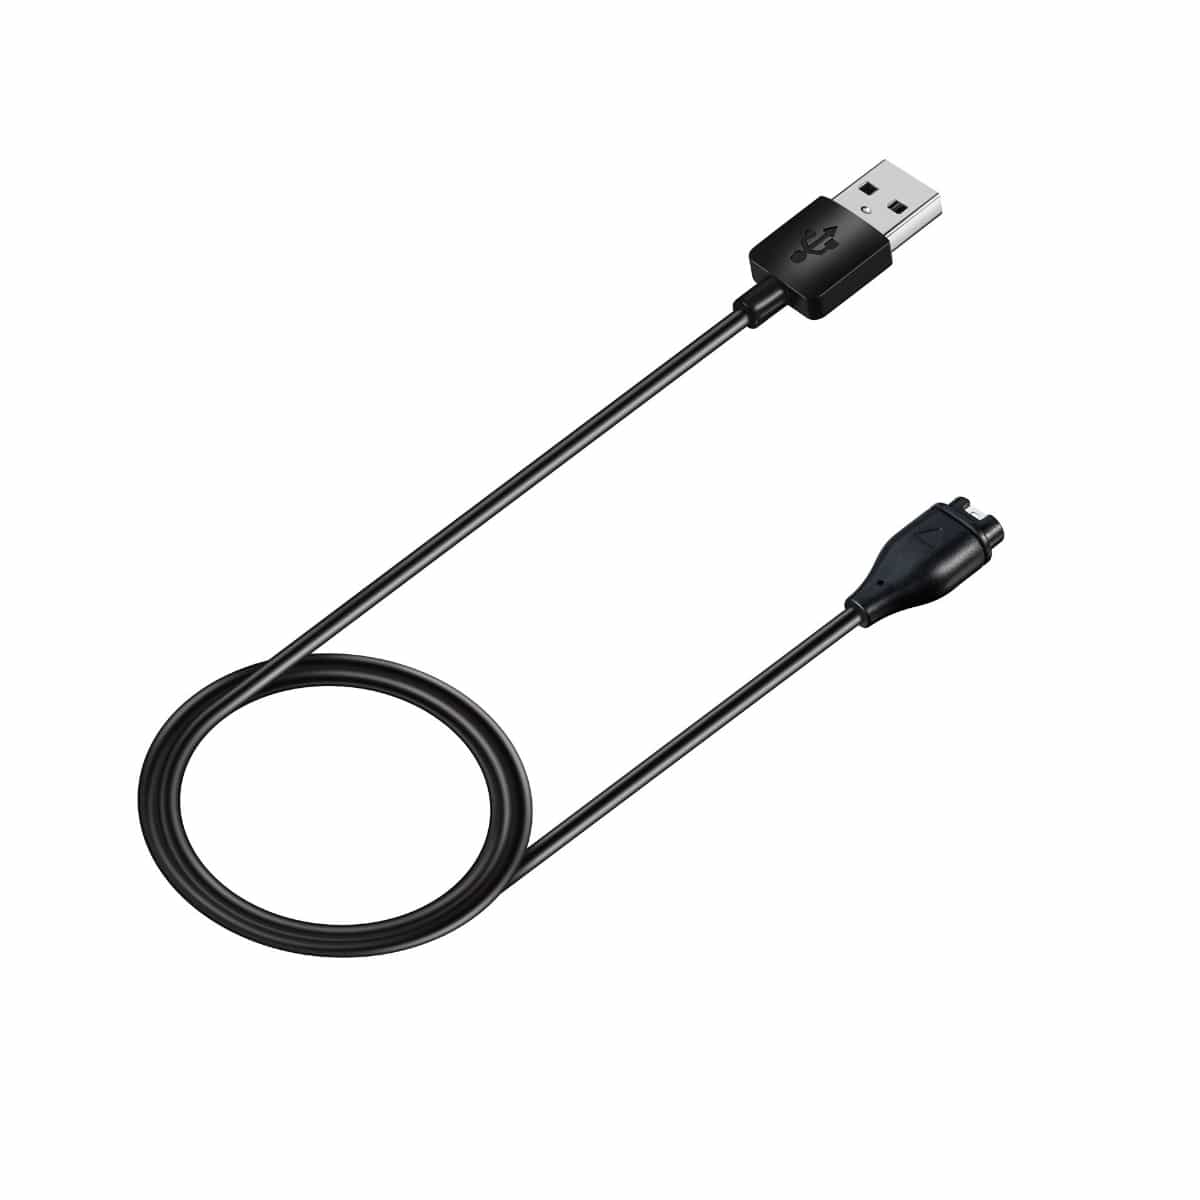 Garmin Watch Charger & Data Cable Replacement   